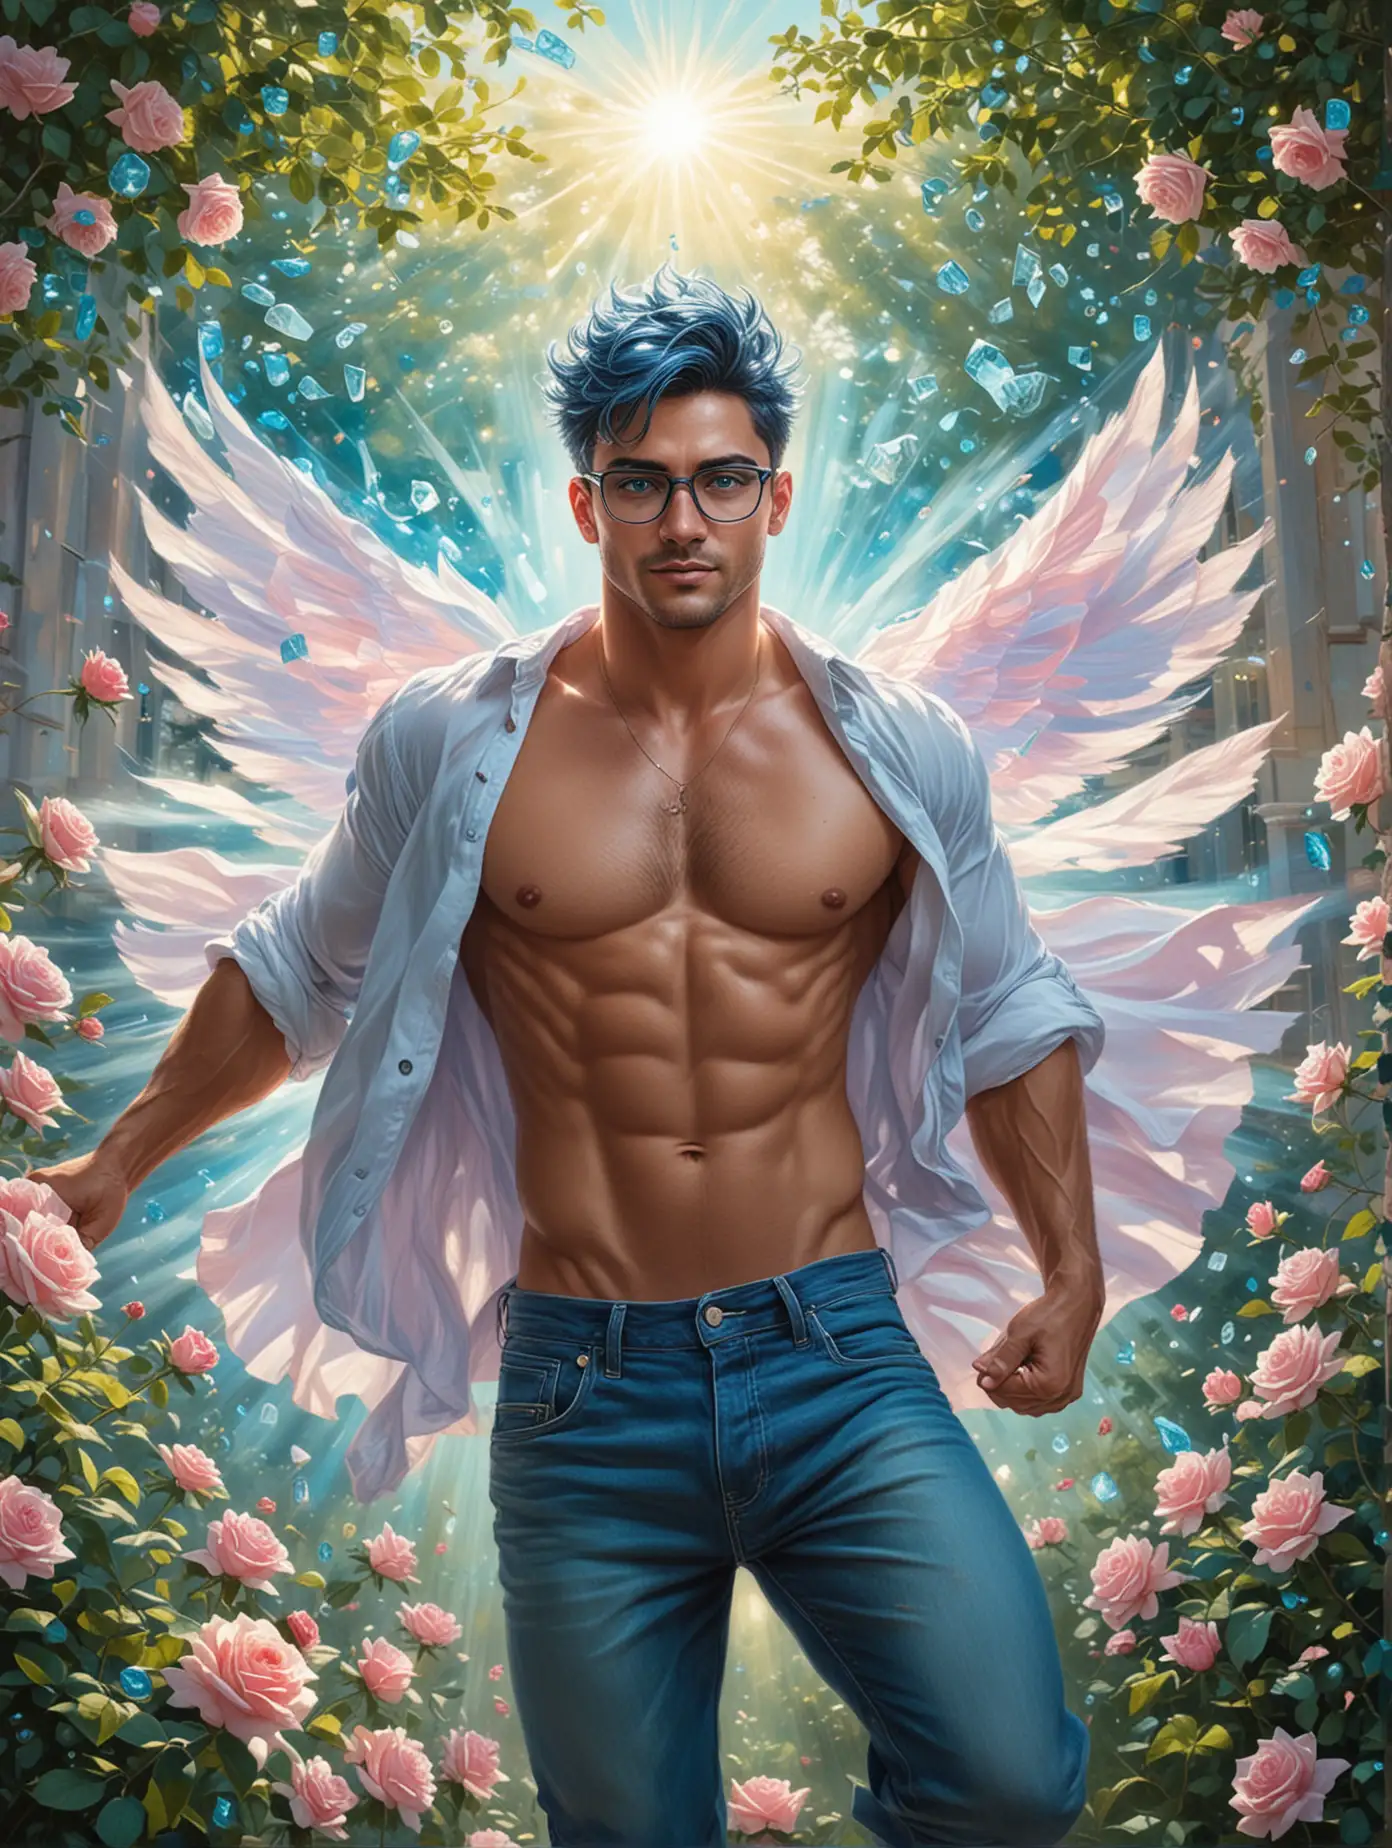 In a breathtaking display of power and transformation, a 30 something shirtless hunk with glasses and mesmerizing aquamarine eyes and short navy blue hair floating mid air. His rugged 5 o'clock shadow adds to his rugged charm as he defies gravity, suspended in mid-air. Clad only in casual jeans, his open pink shirt hangs in tatters, fluttering around him like a banner in the wind. As he ascends, a brilliant aquamarine aura radiates from the circular energy crystal embedded in the center of his chest. The crystal pulses with energy, casting a dazzling glow that illuminates the surrounding rose garden.